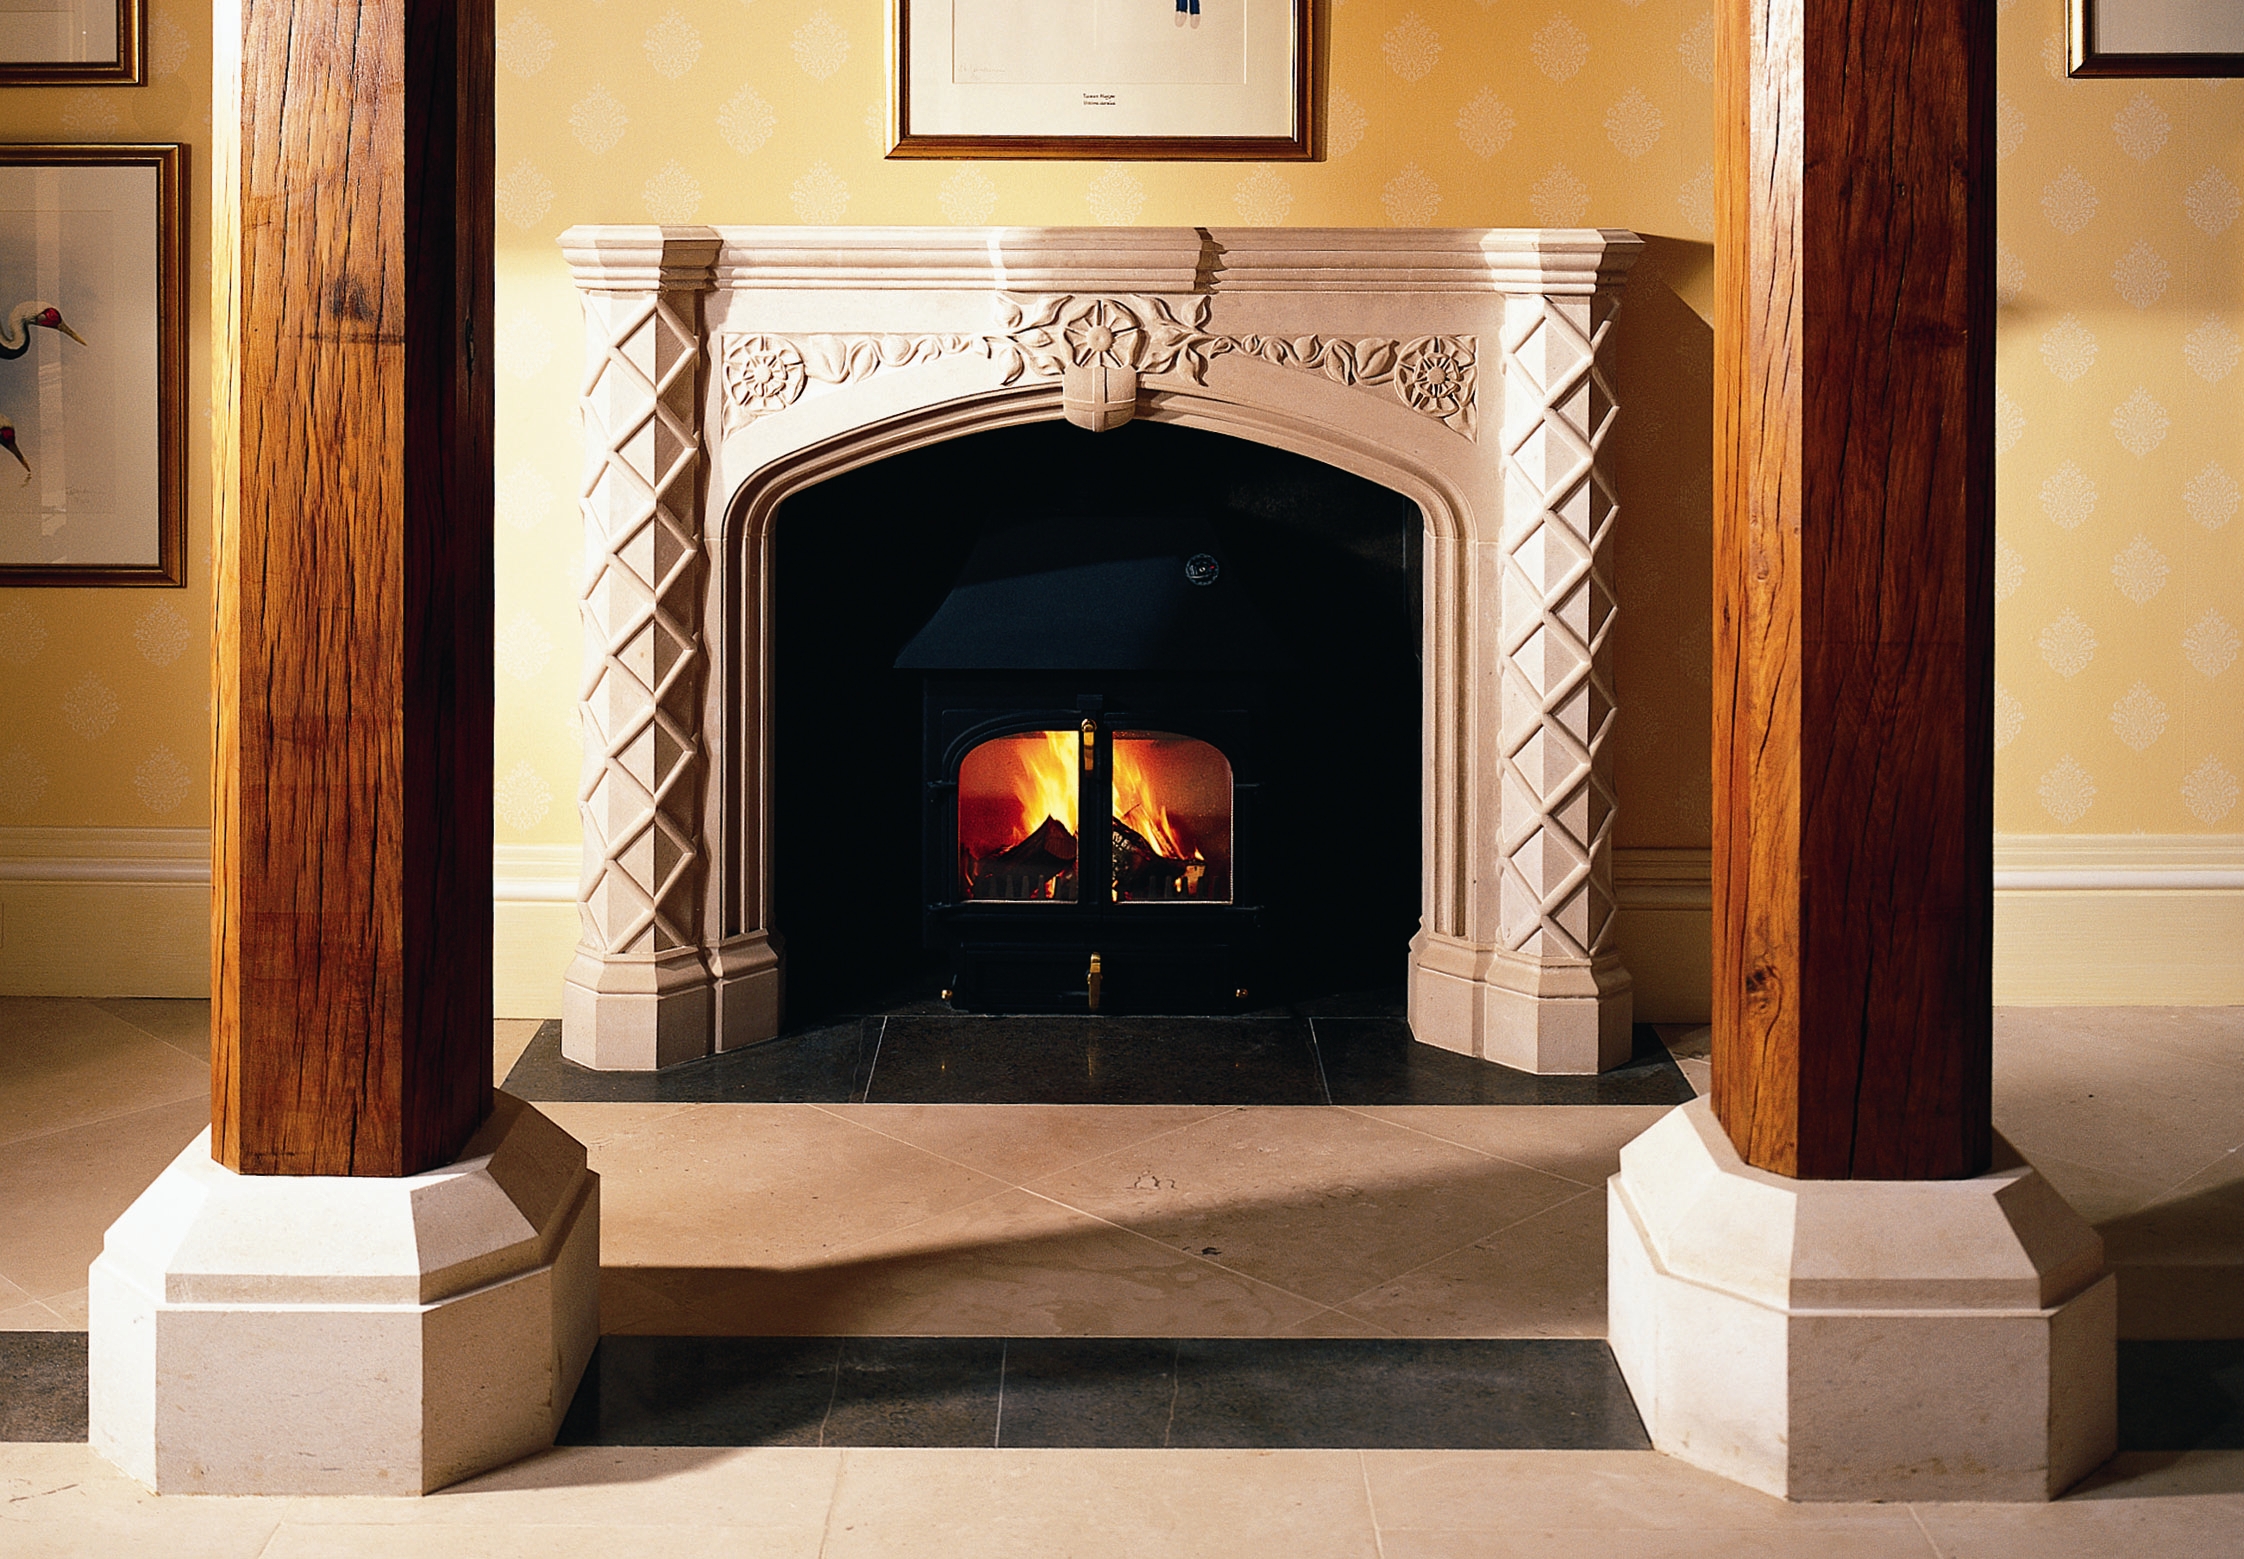 15. Carved Portland stone fireplace, influenced by the refurbished hall’s building details – North Yorkshire